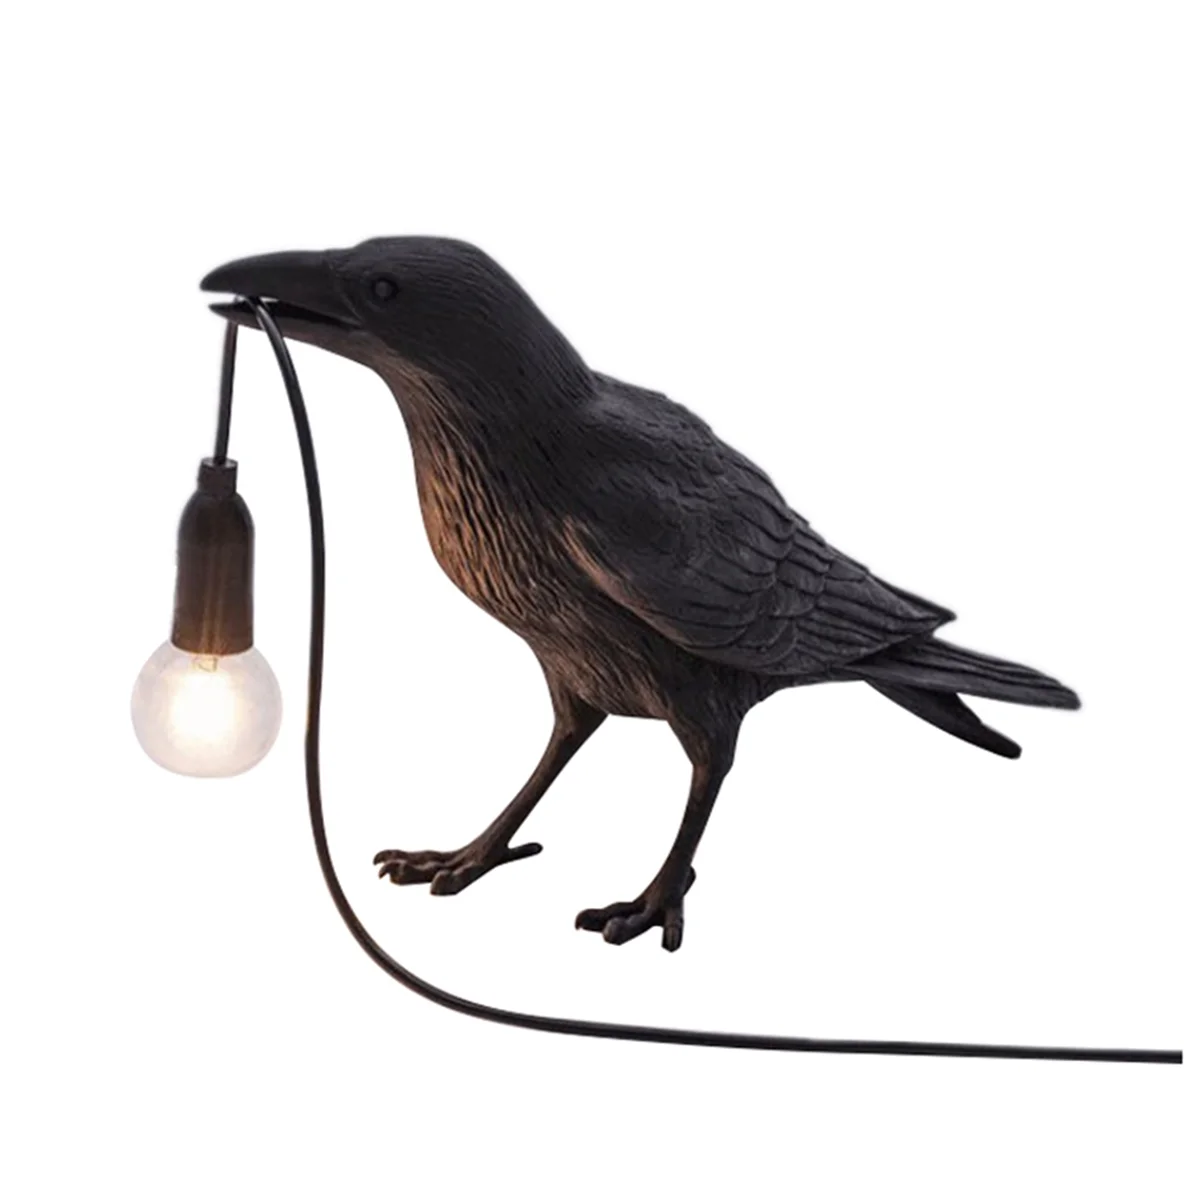 

US Plug,Crow Lamp-Raven Table Lamp with Bulb, Gothic Crow Light - Raven Decor for Bedside Bedroom Living Room Decoration